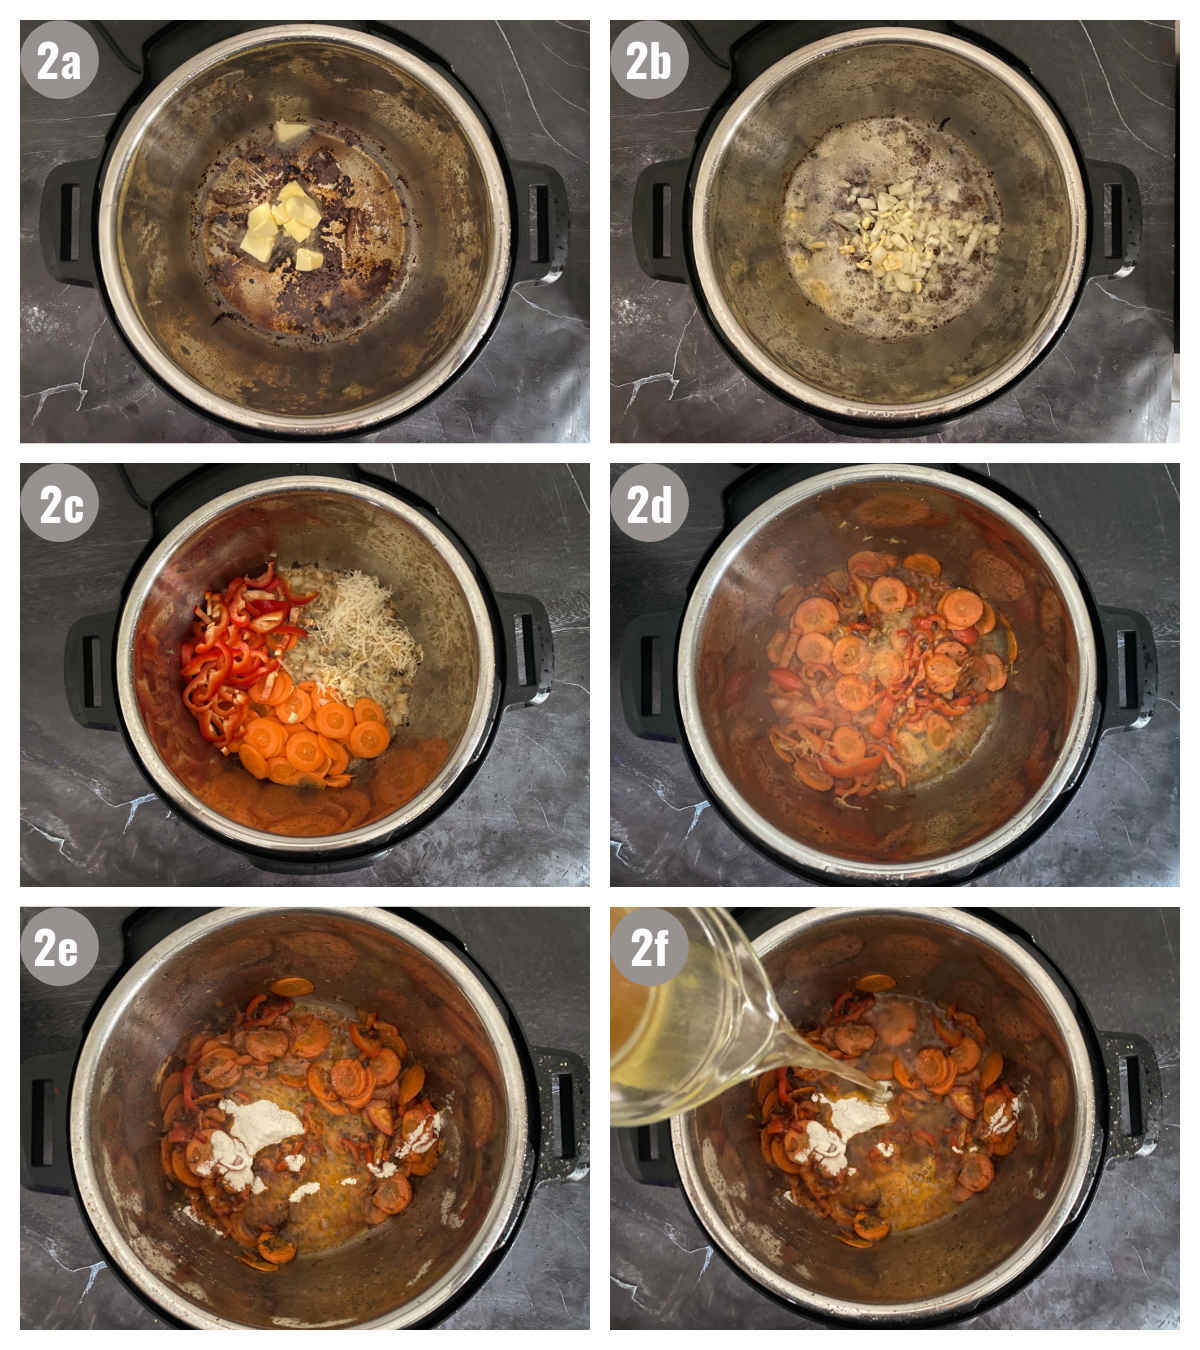 Six photographs, two by three, of vegetables cooked in an Instant Pot. 